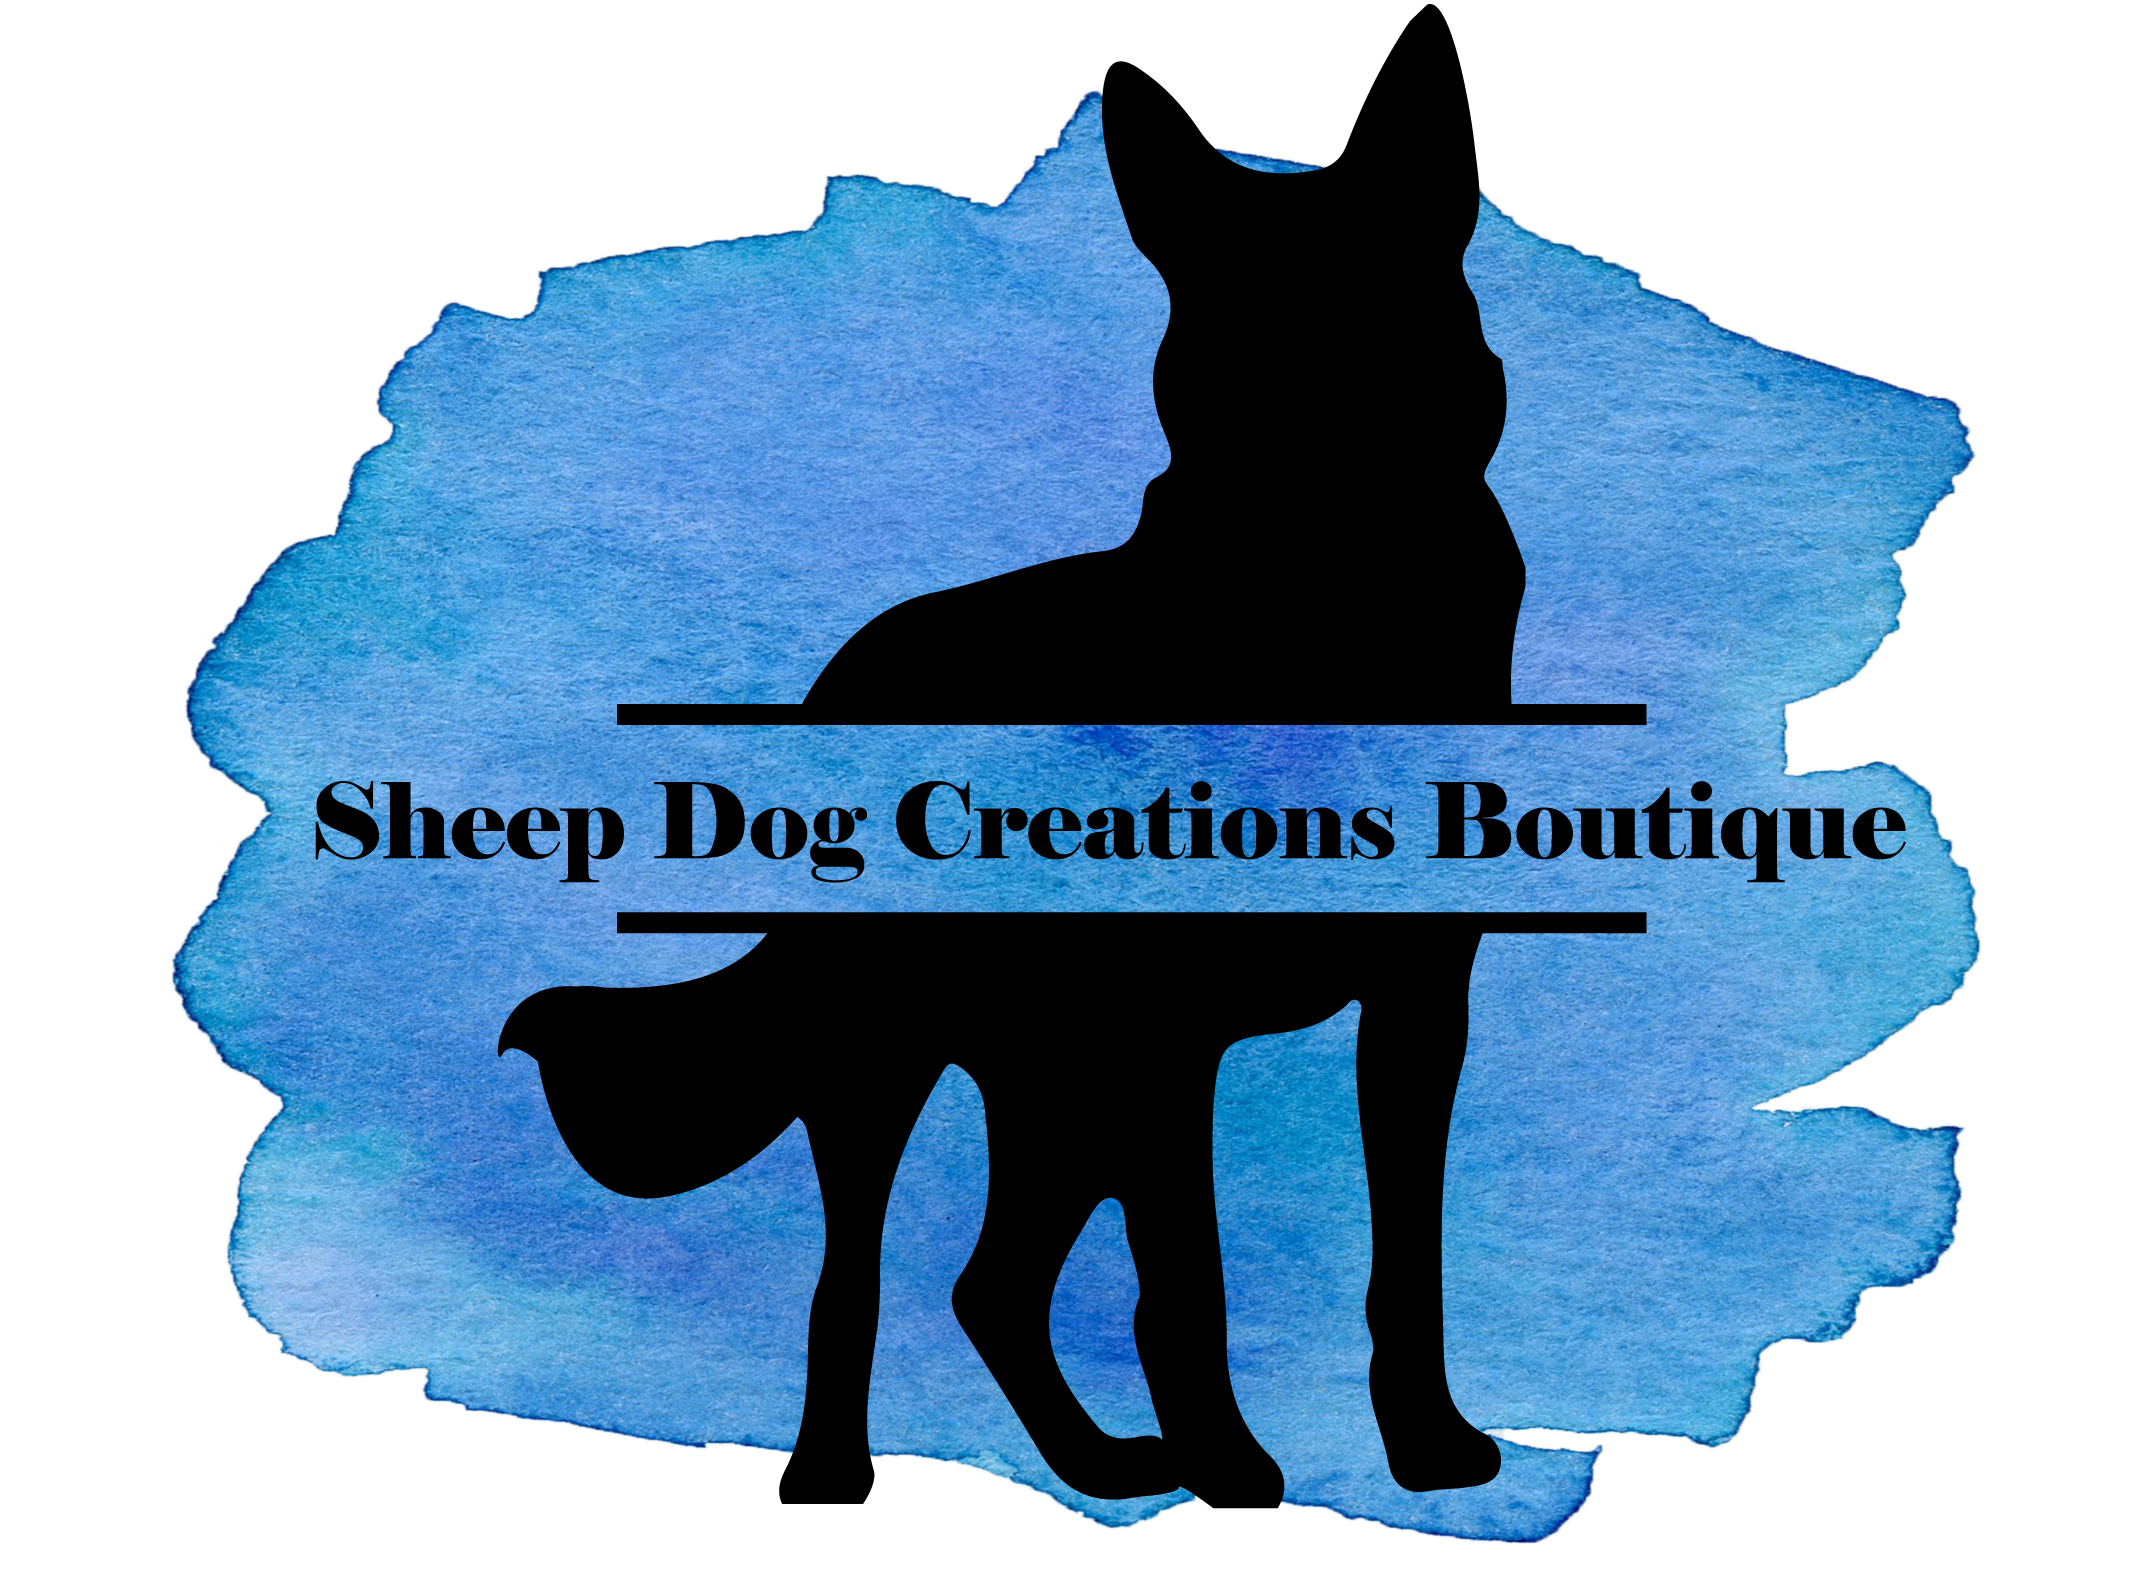 Sheep Dog Creations Boutique